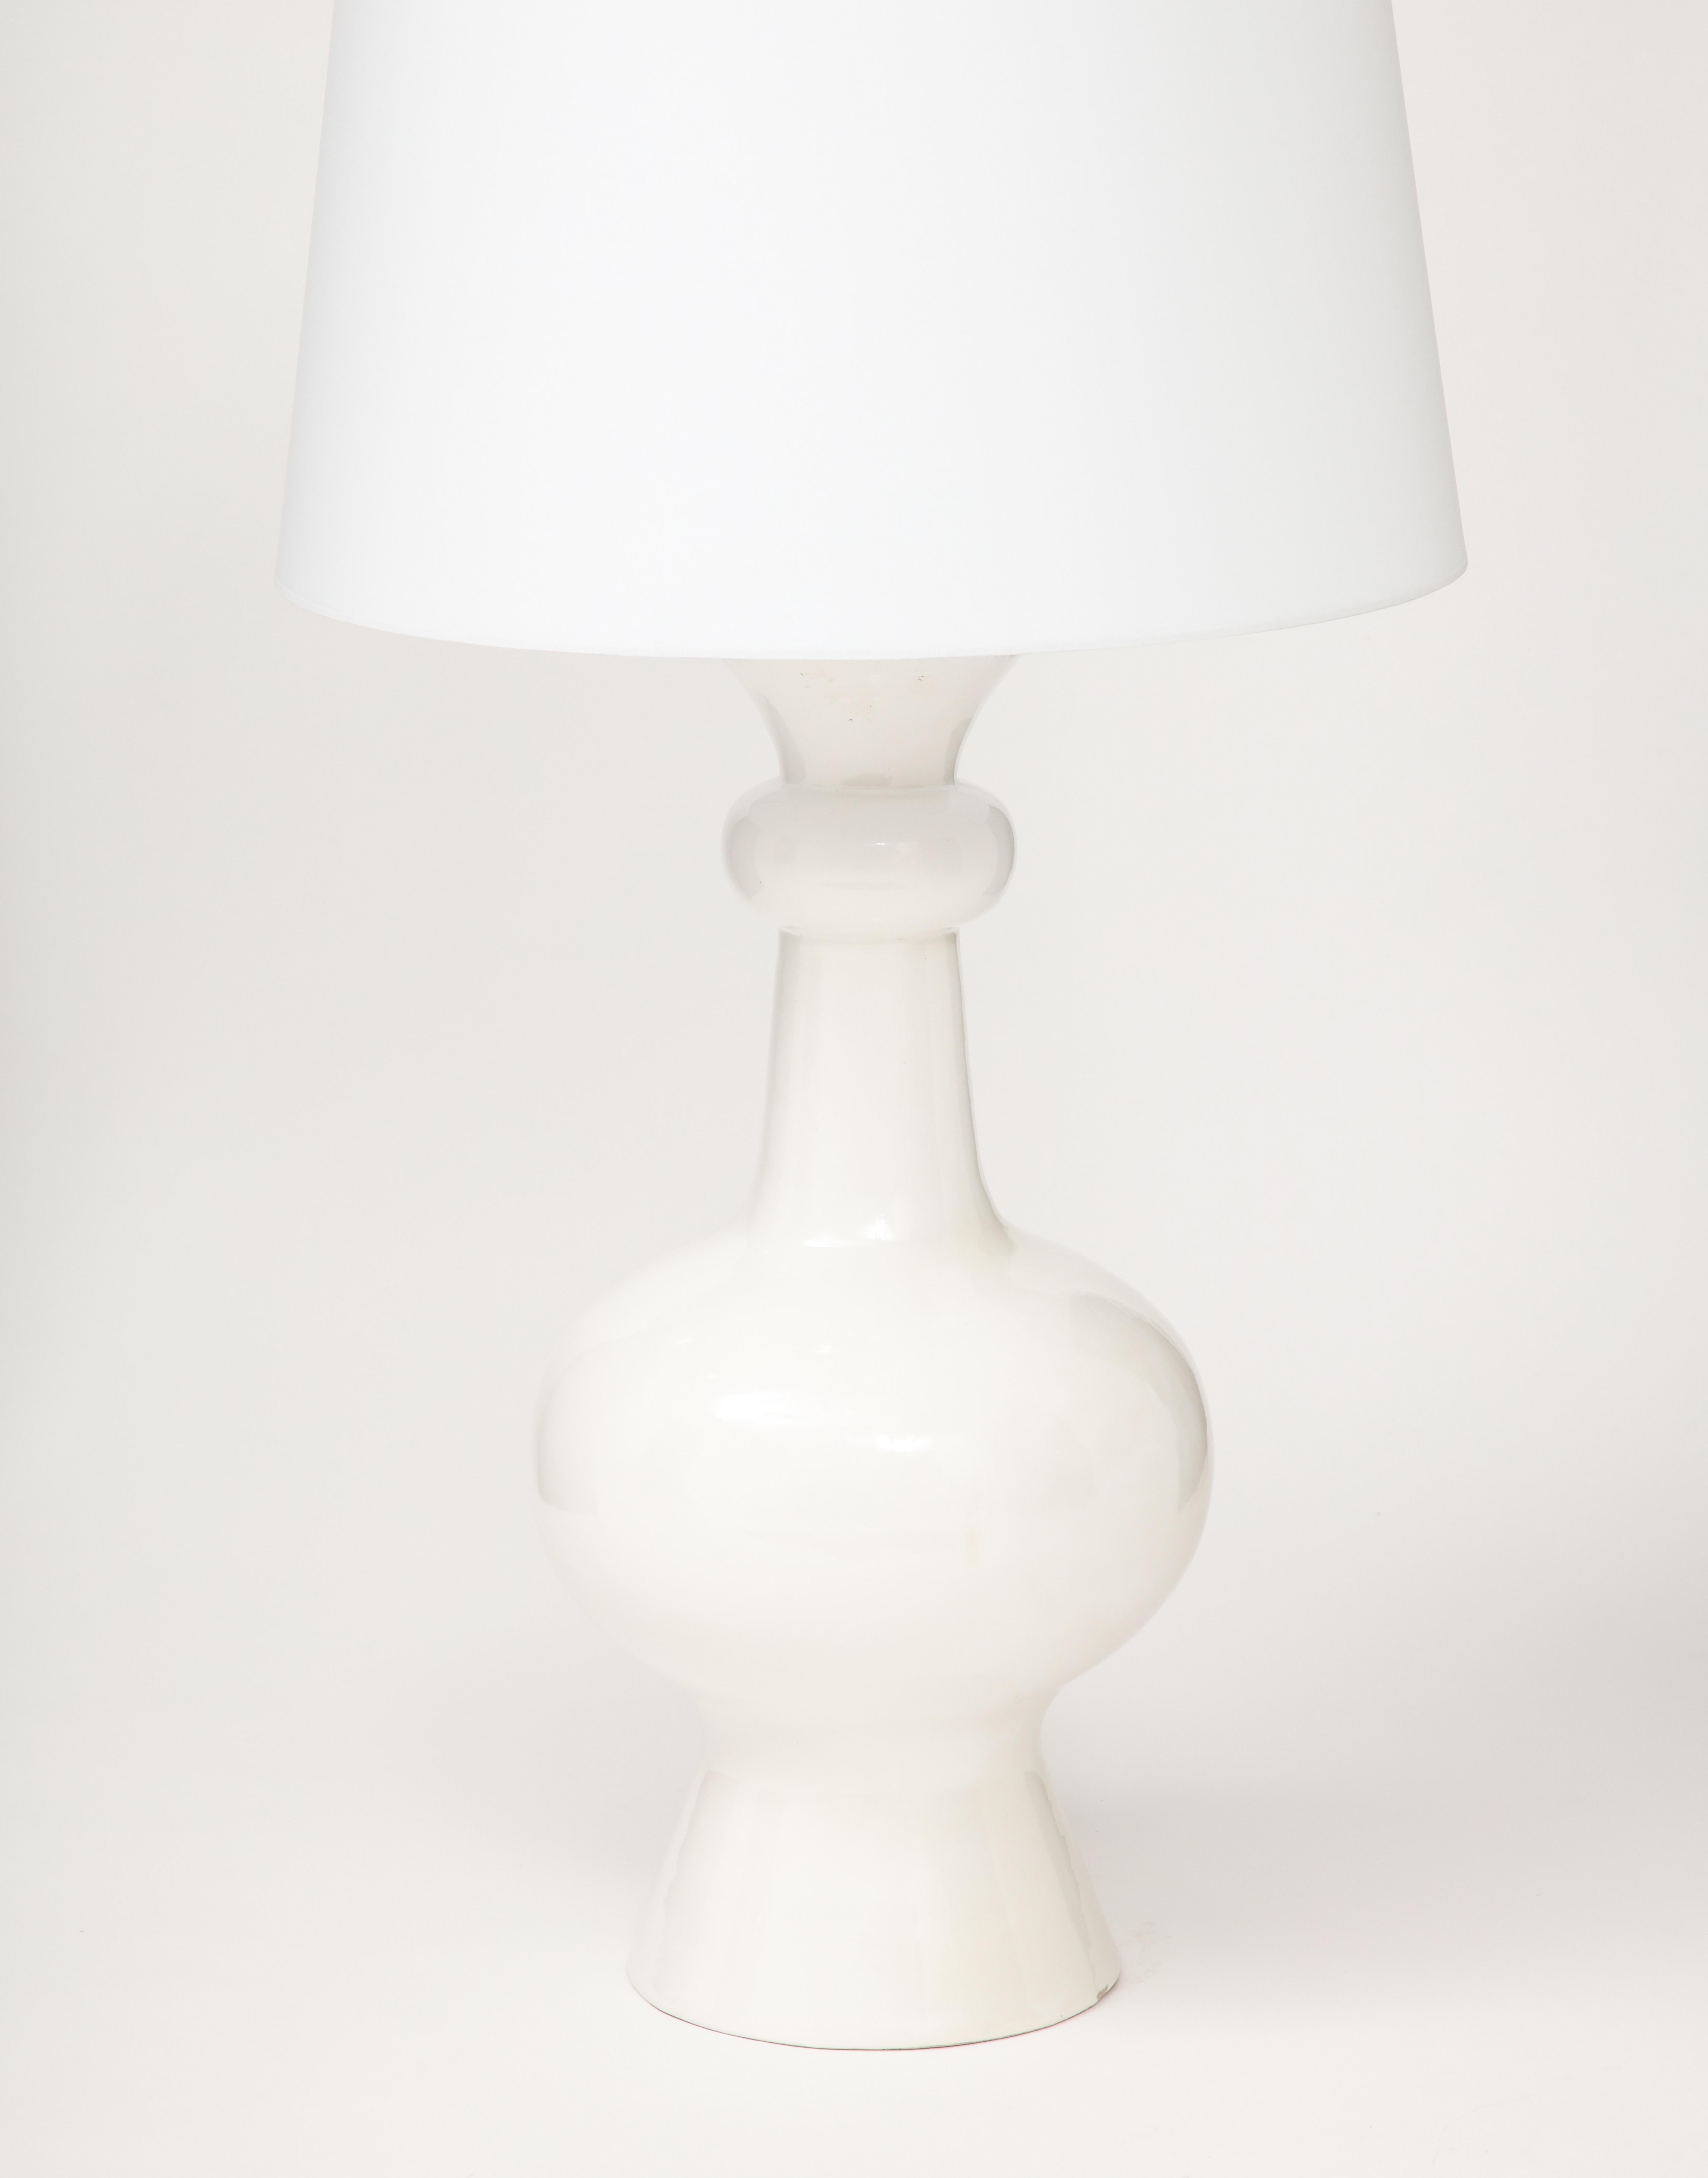 Large Scale Italian White Ceramic Lamp, 1960's In Good Condition For Sale In Brooklyn, NY